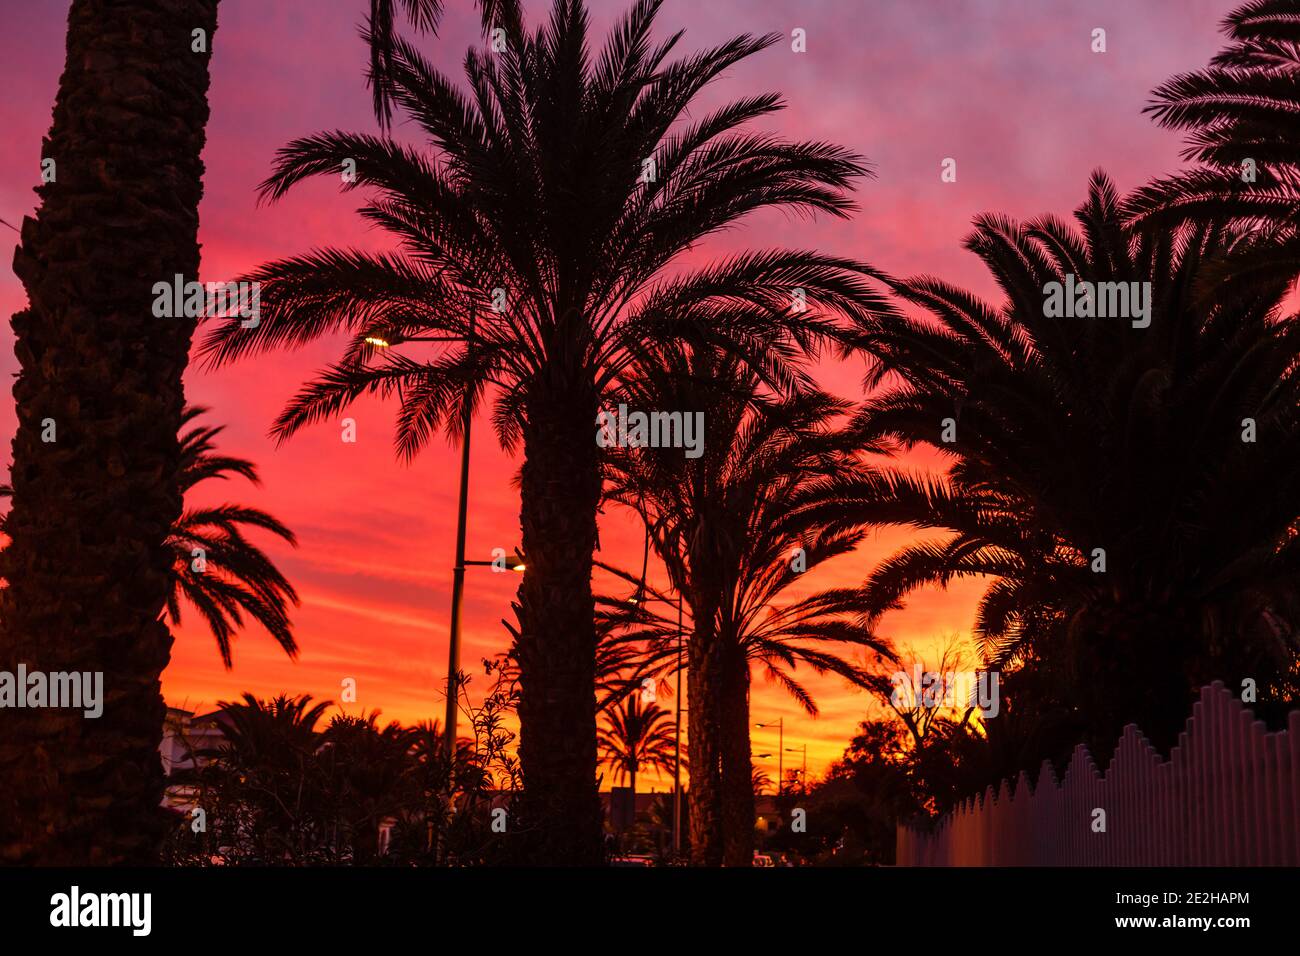 Palm tree silhouette during sunset in canary islands Stock Photo